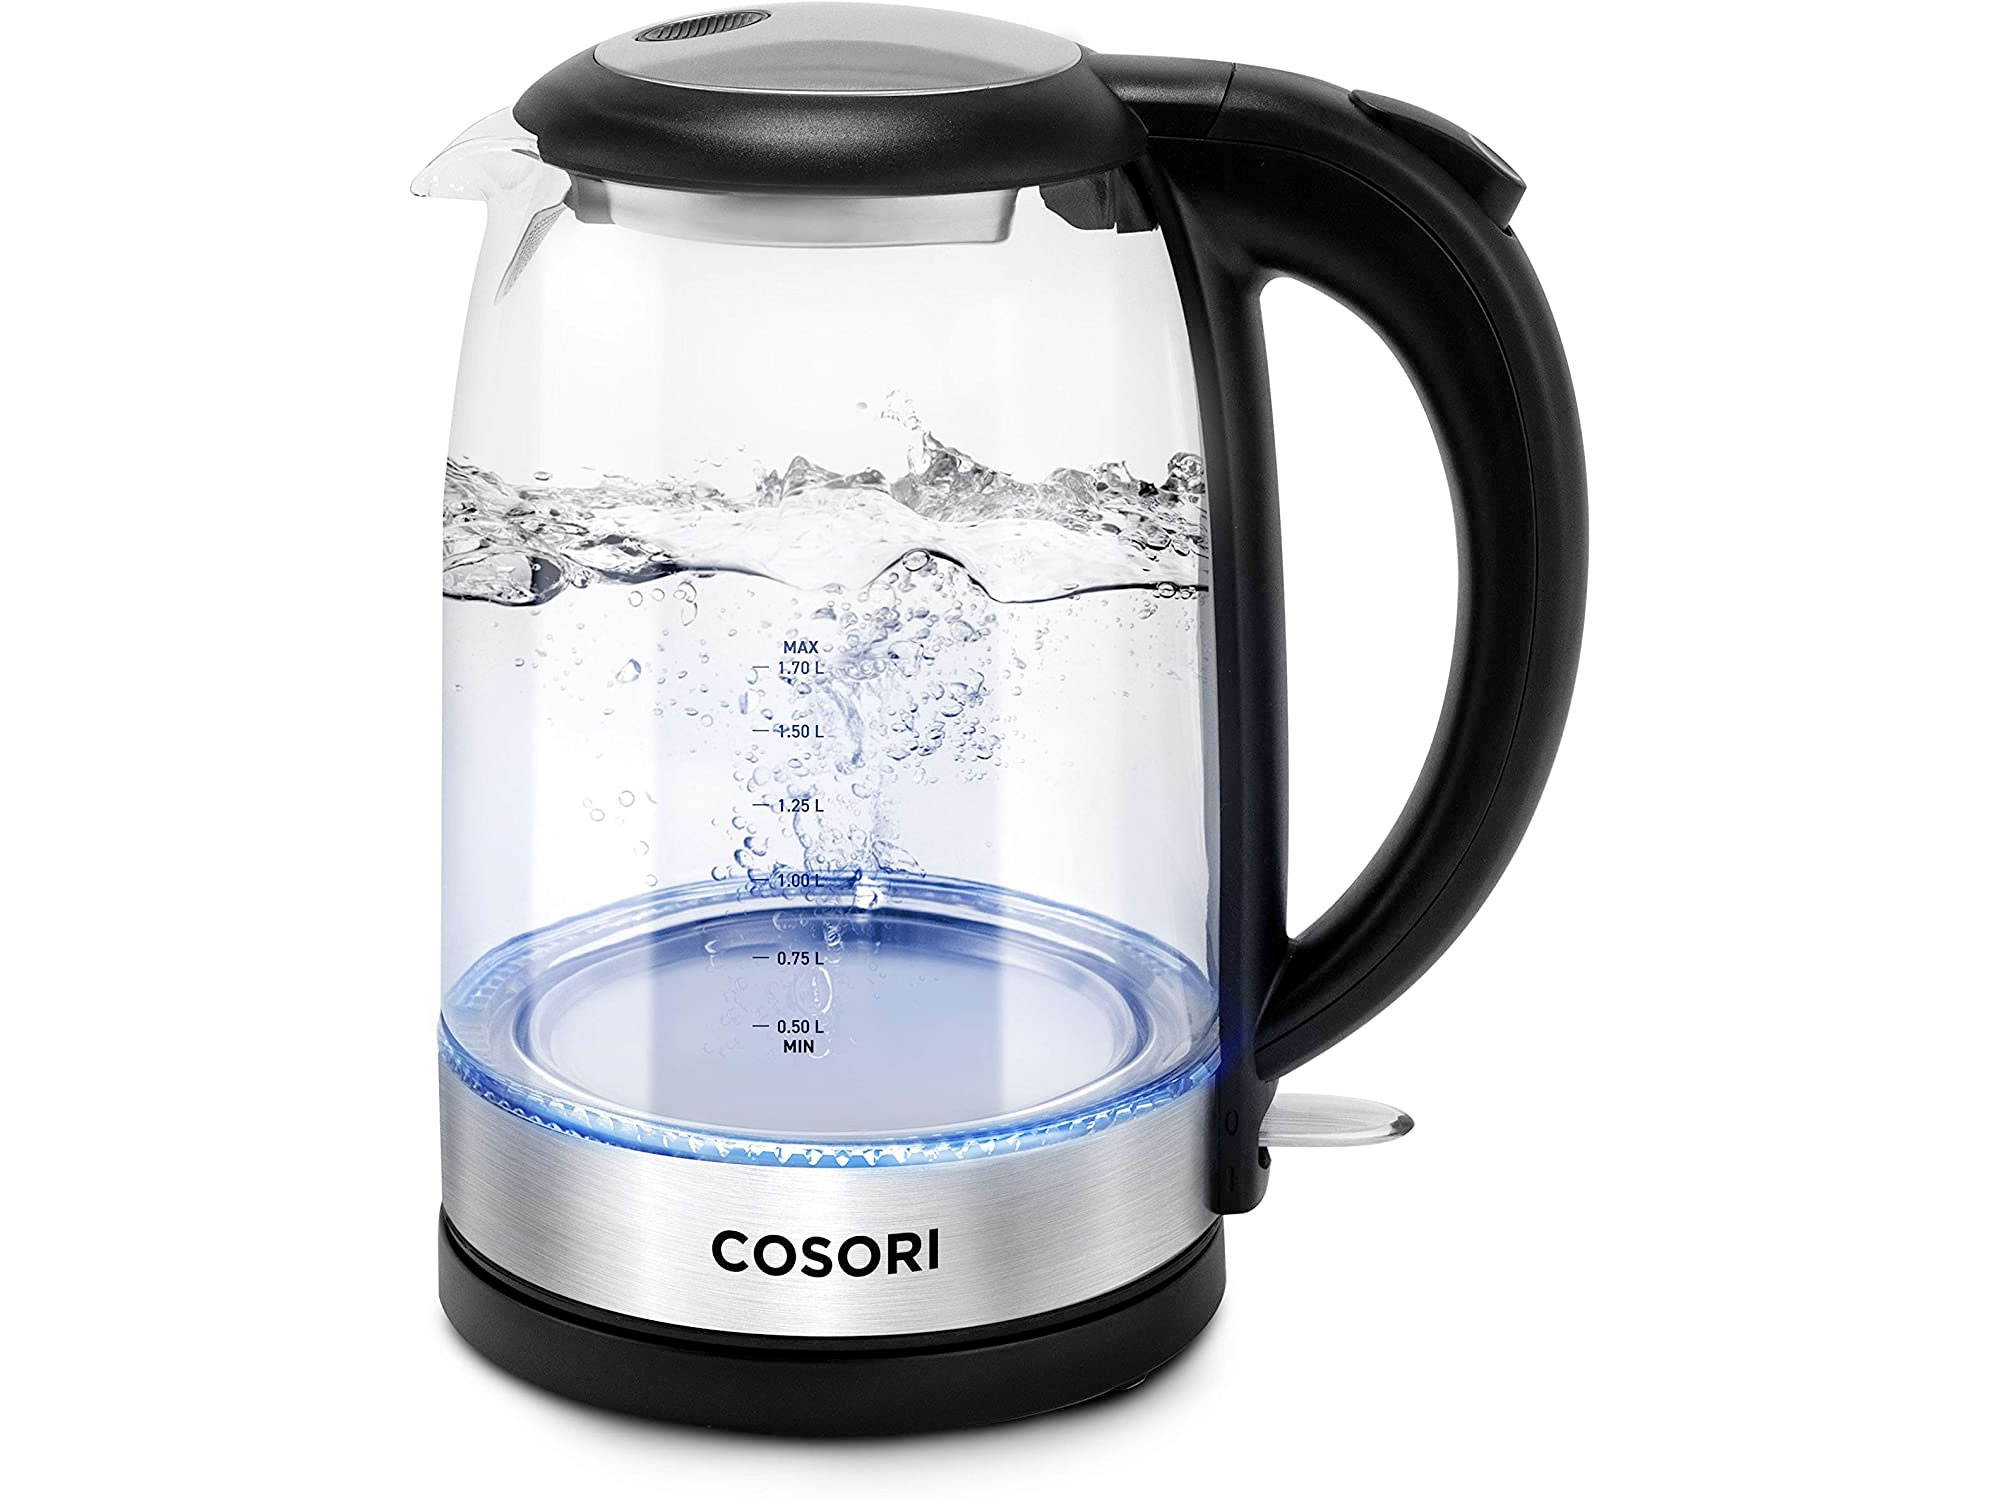 Amazon：COSORI Electric Kettle with Upgraded Stainless Steel Filter只賣$33.75